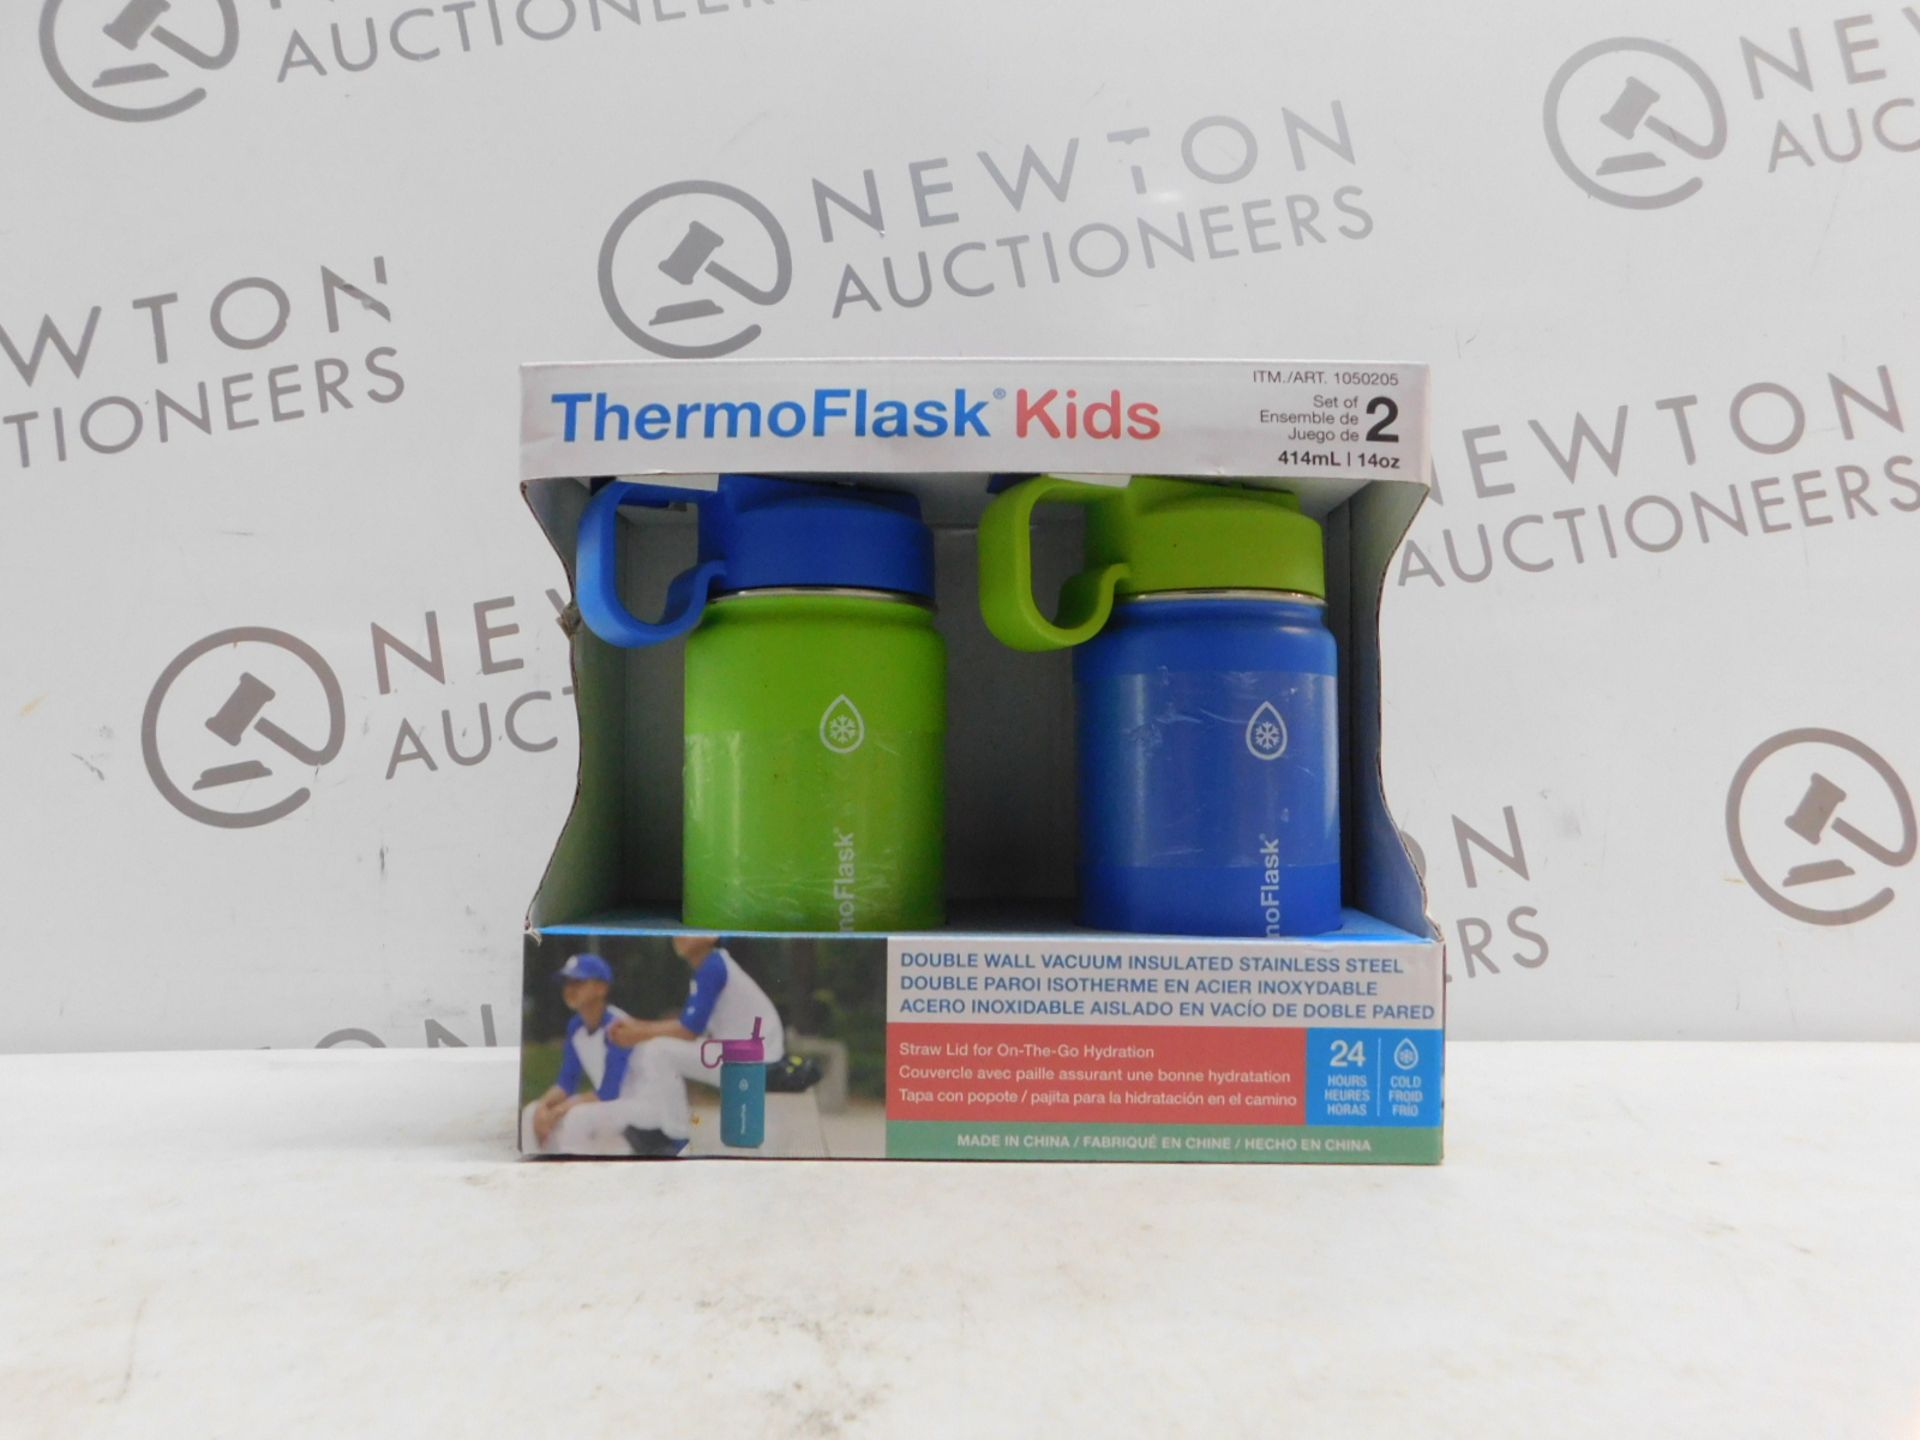 1 BOXED SET OF 2 TAKEYA THERMOFLASK KIDS INSULATED STAINLESS STEEL WATER BOTTLES RRP Â£29.99